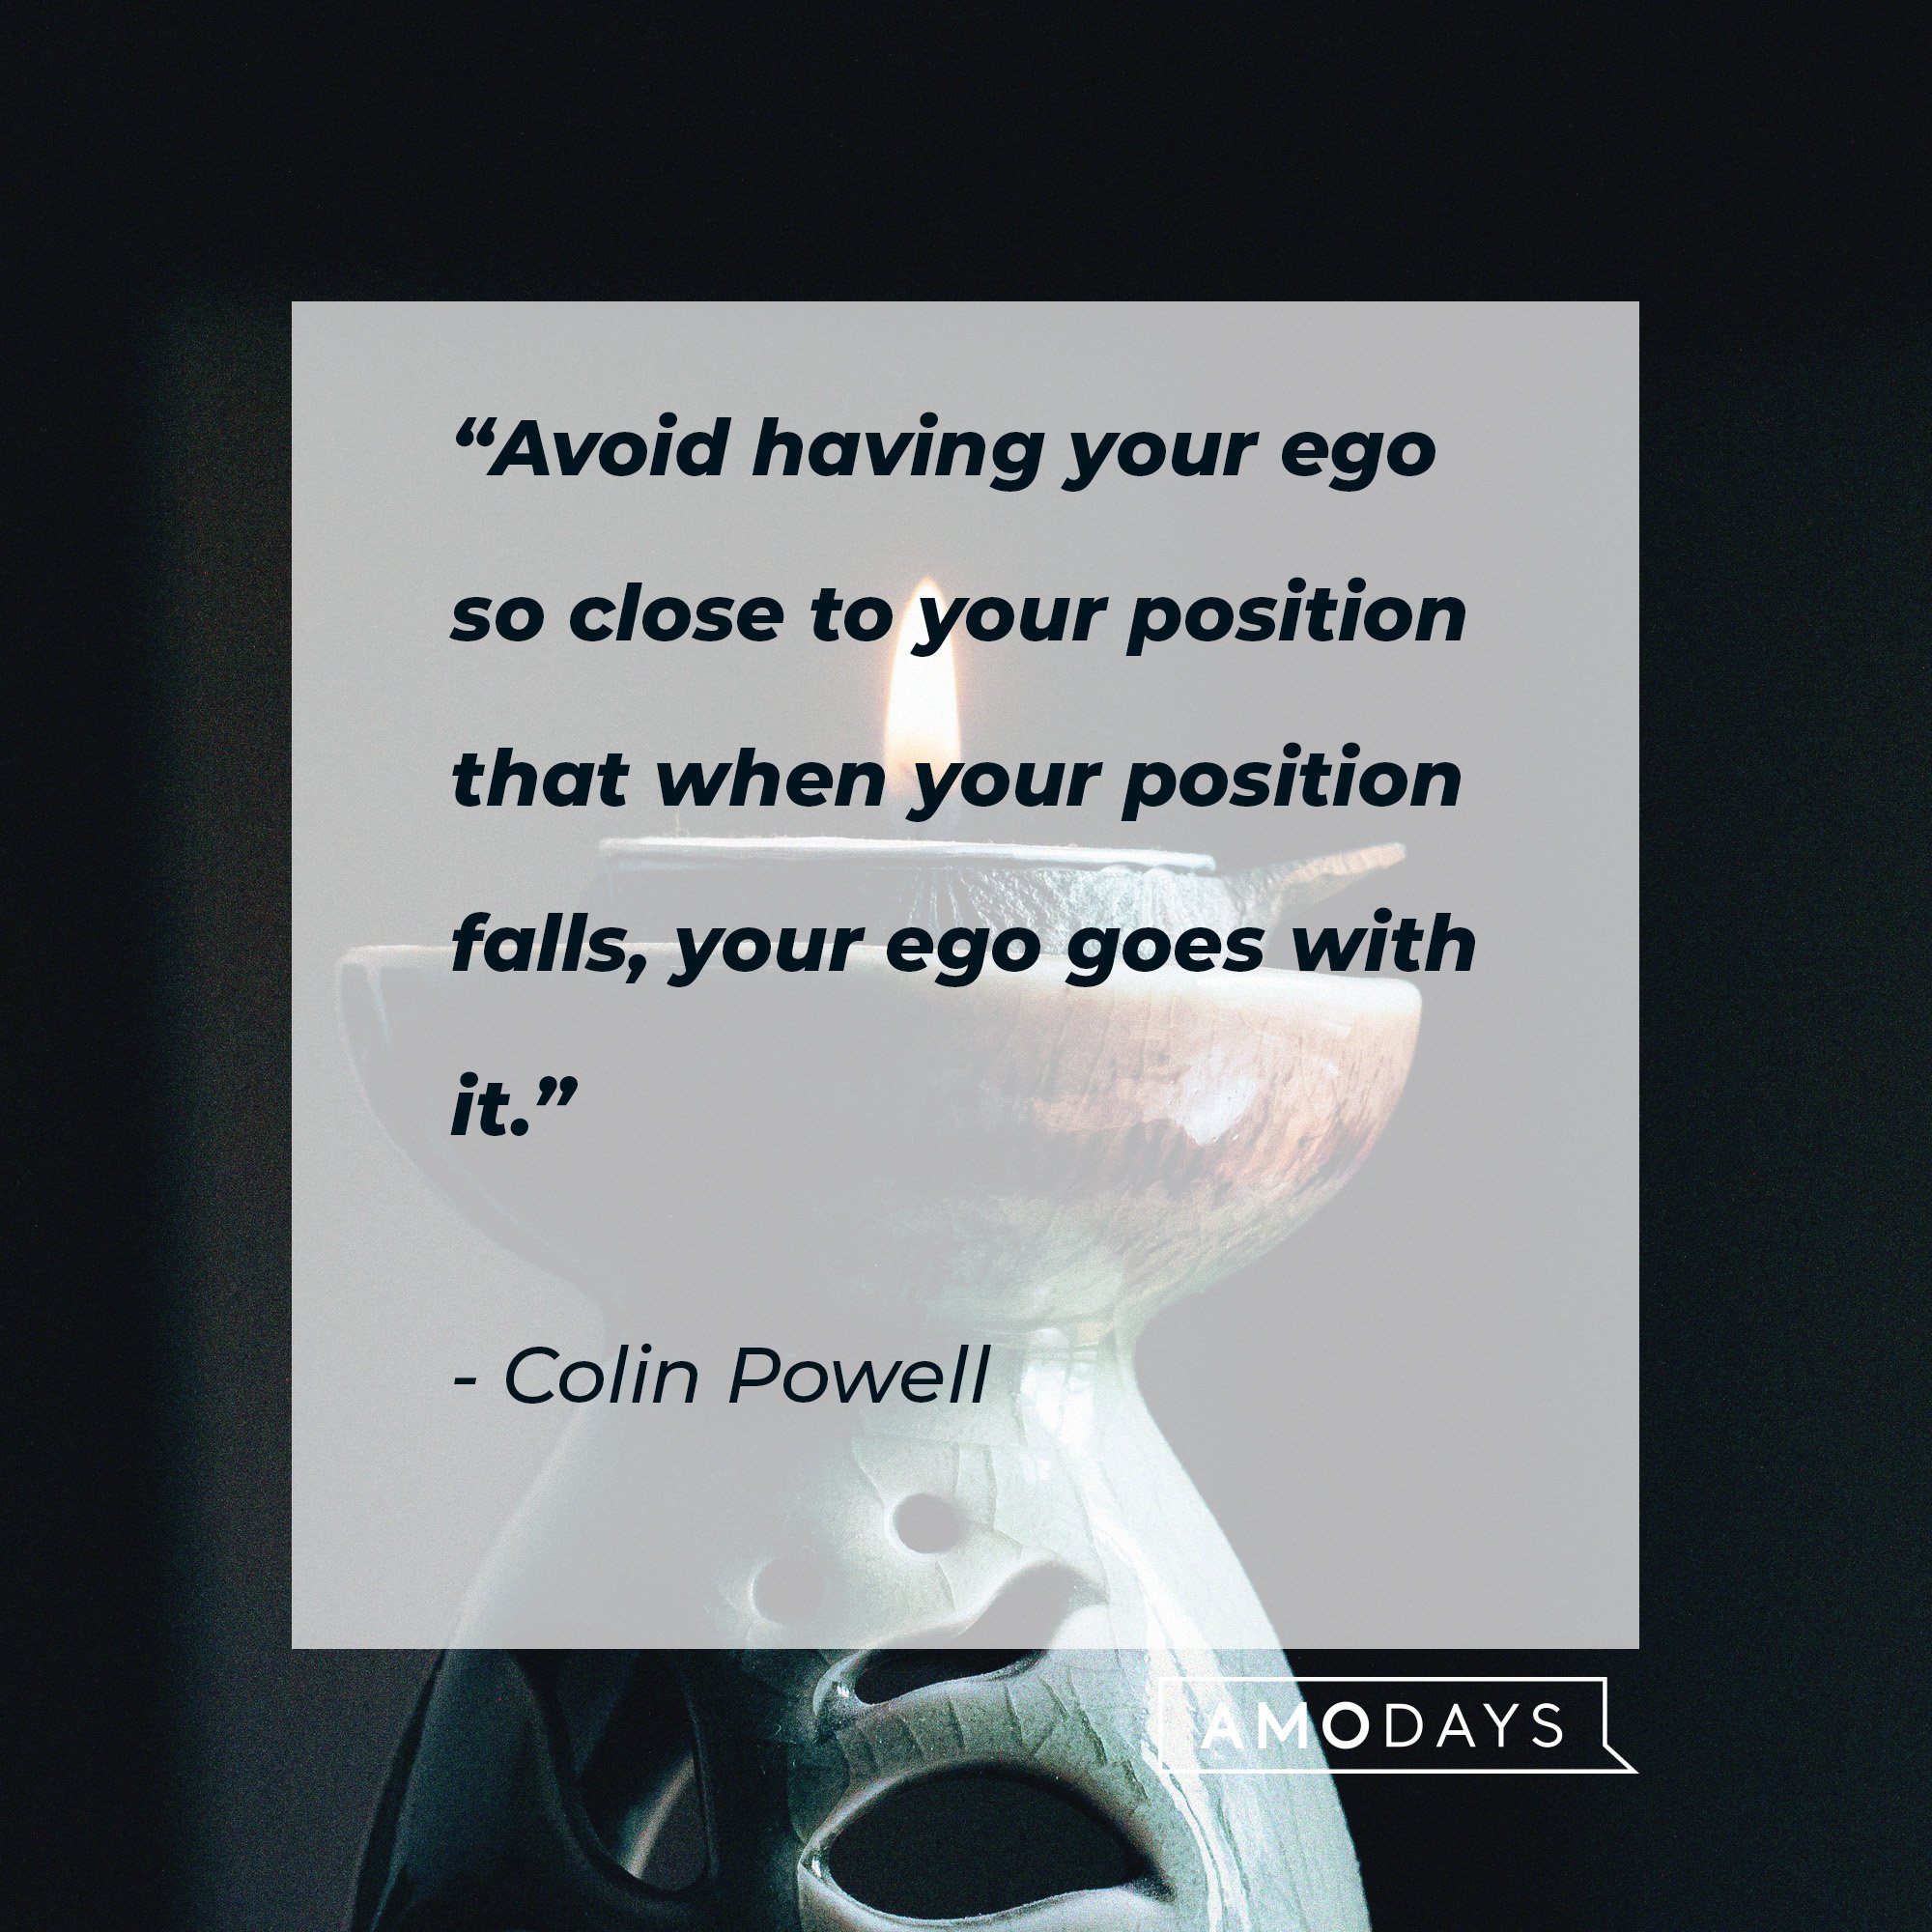 Colin Powell's quote: “Avoid having your ego so close to your position that when your position falls, your ego goes with it.” | Image: AmoDays